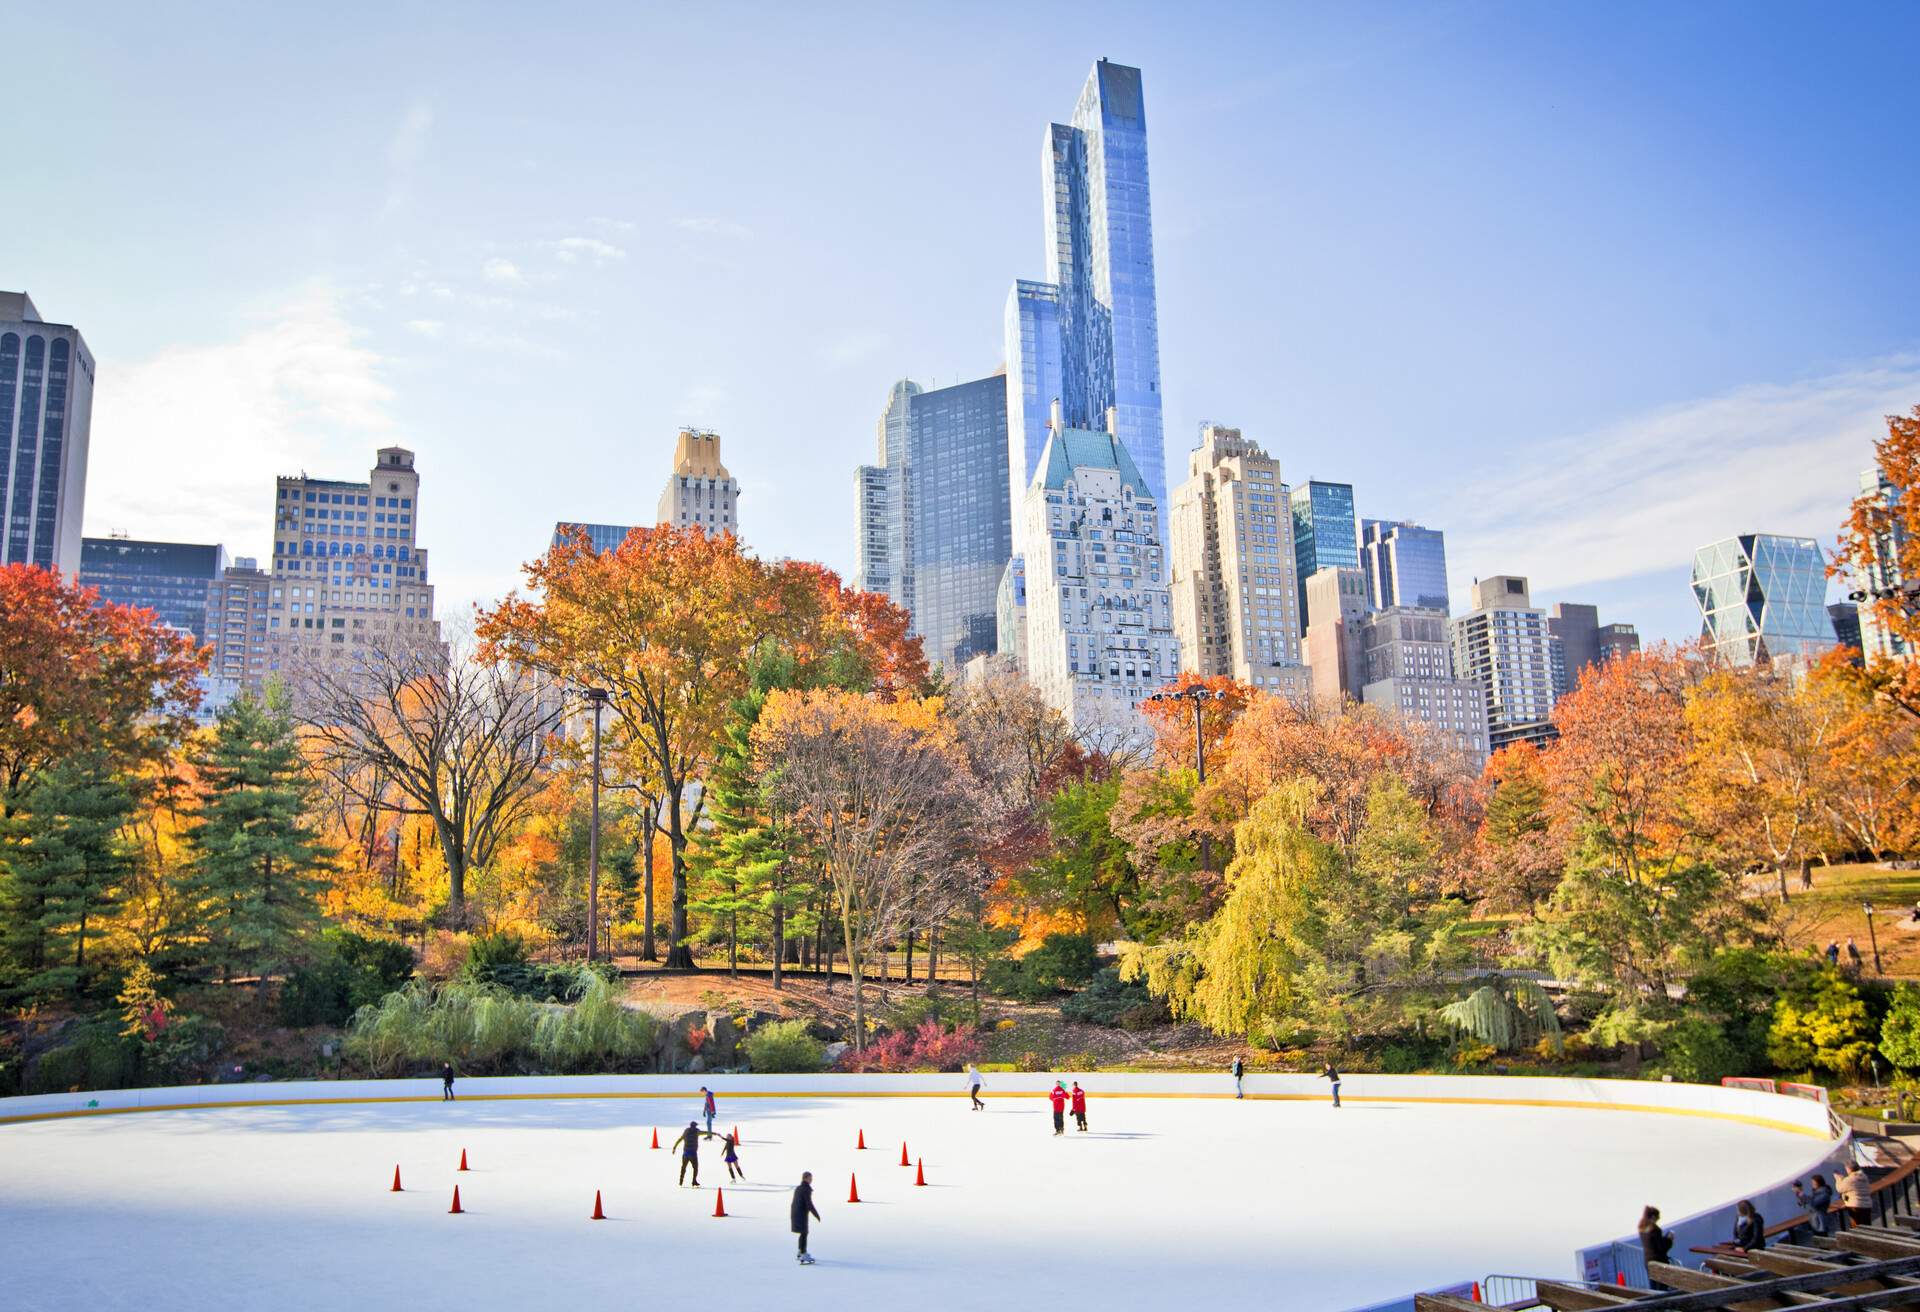 Ice skaters having fun in New York Central Park in fall ; Shutterstock ID 230818327; Purchase Order: SF-06928905; Job: ; Client/Licensee: ; Other: